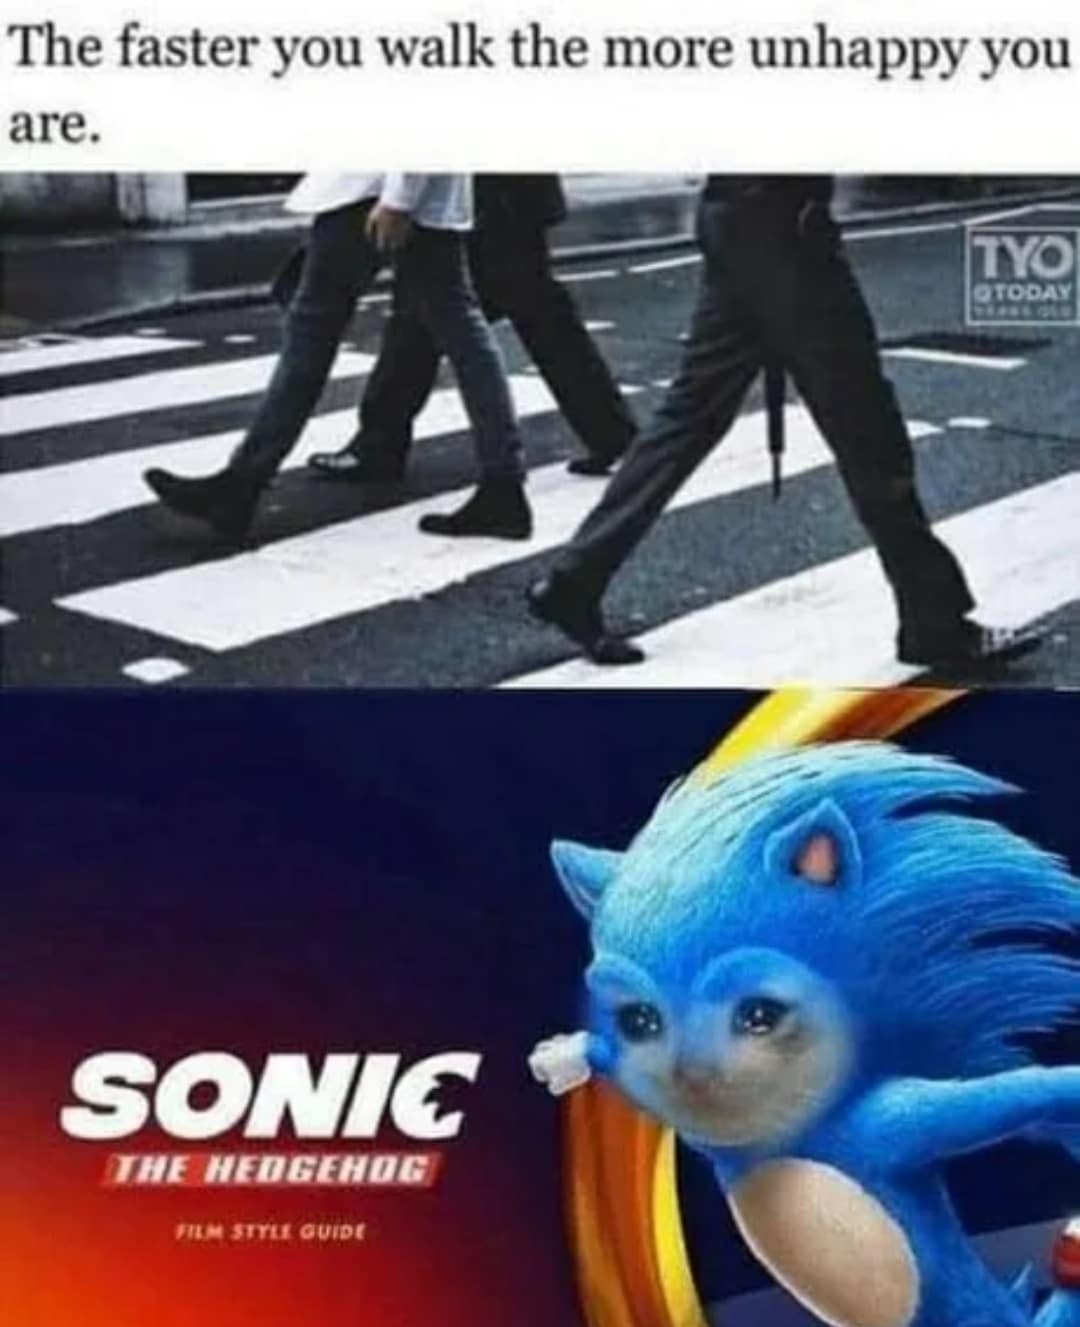 Funny, Sonic, Usain Bolt, Sadgehog, Barry Allen other memes Funny, Sonic, Usain Bolt, Sadgehog, Barry Allen text: The faster you walk the more unhappy you are. IYO o room SONIC HEDGEHae srrtf 